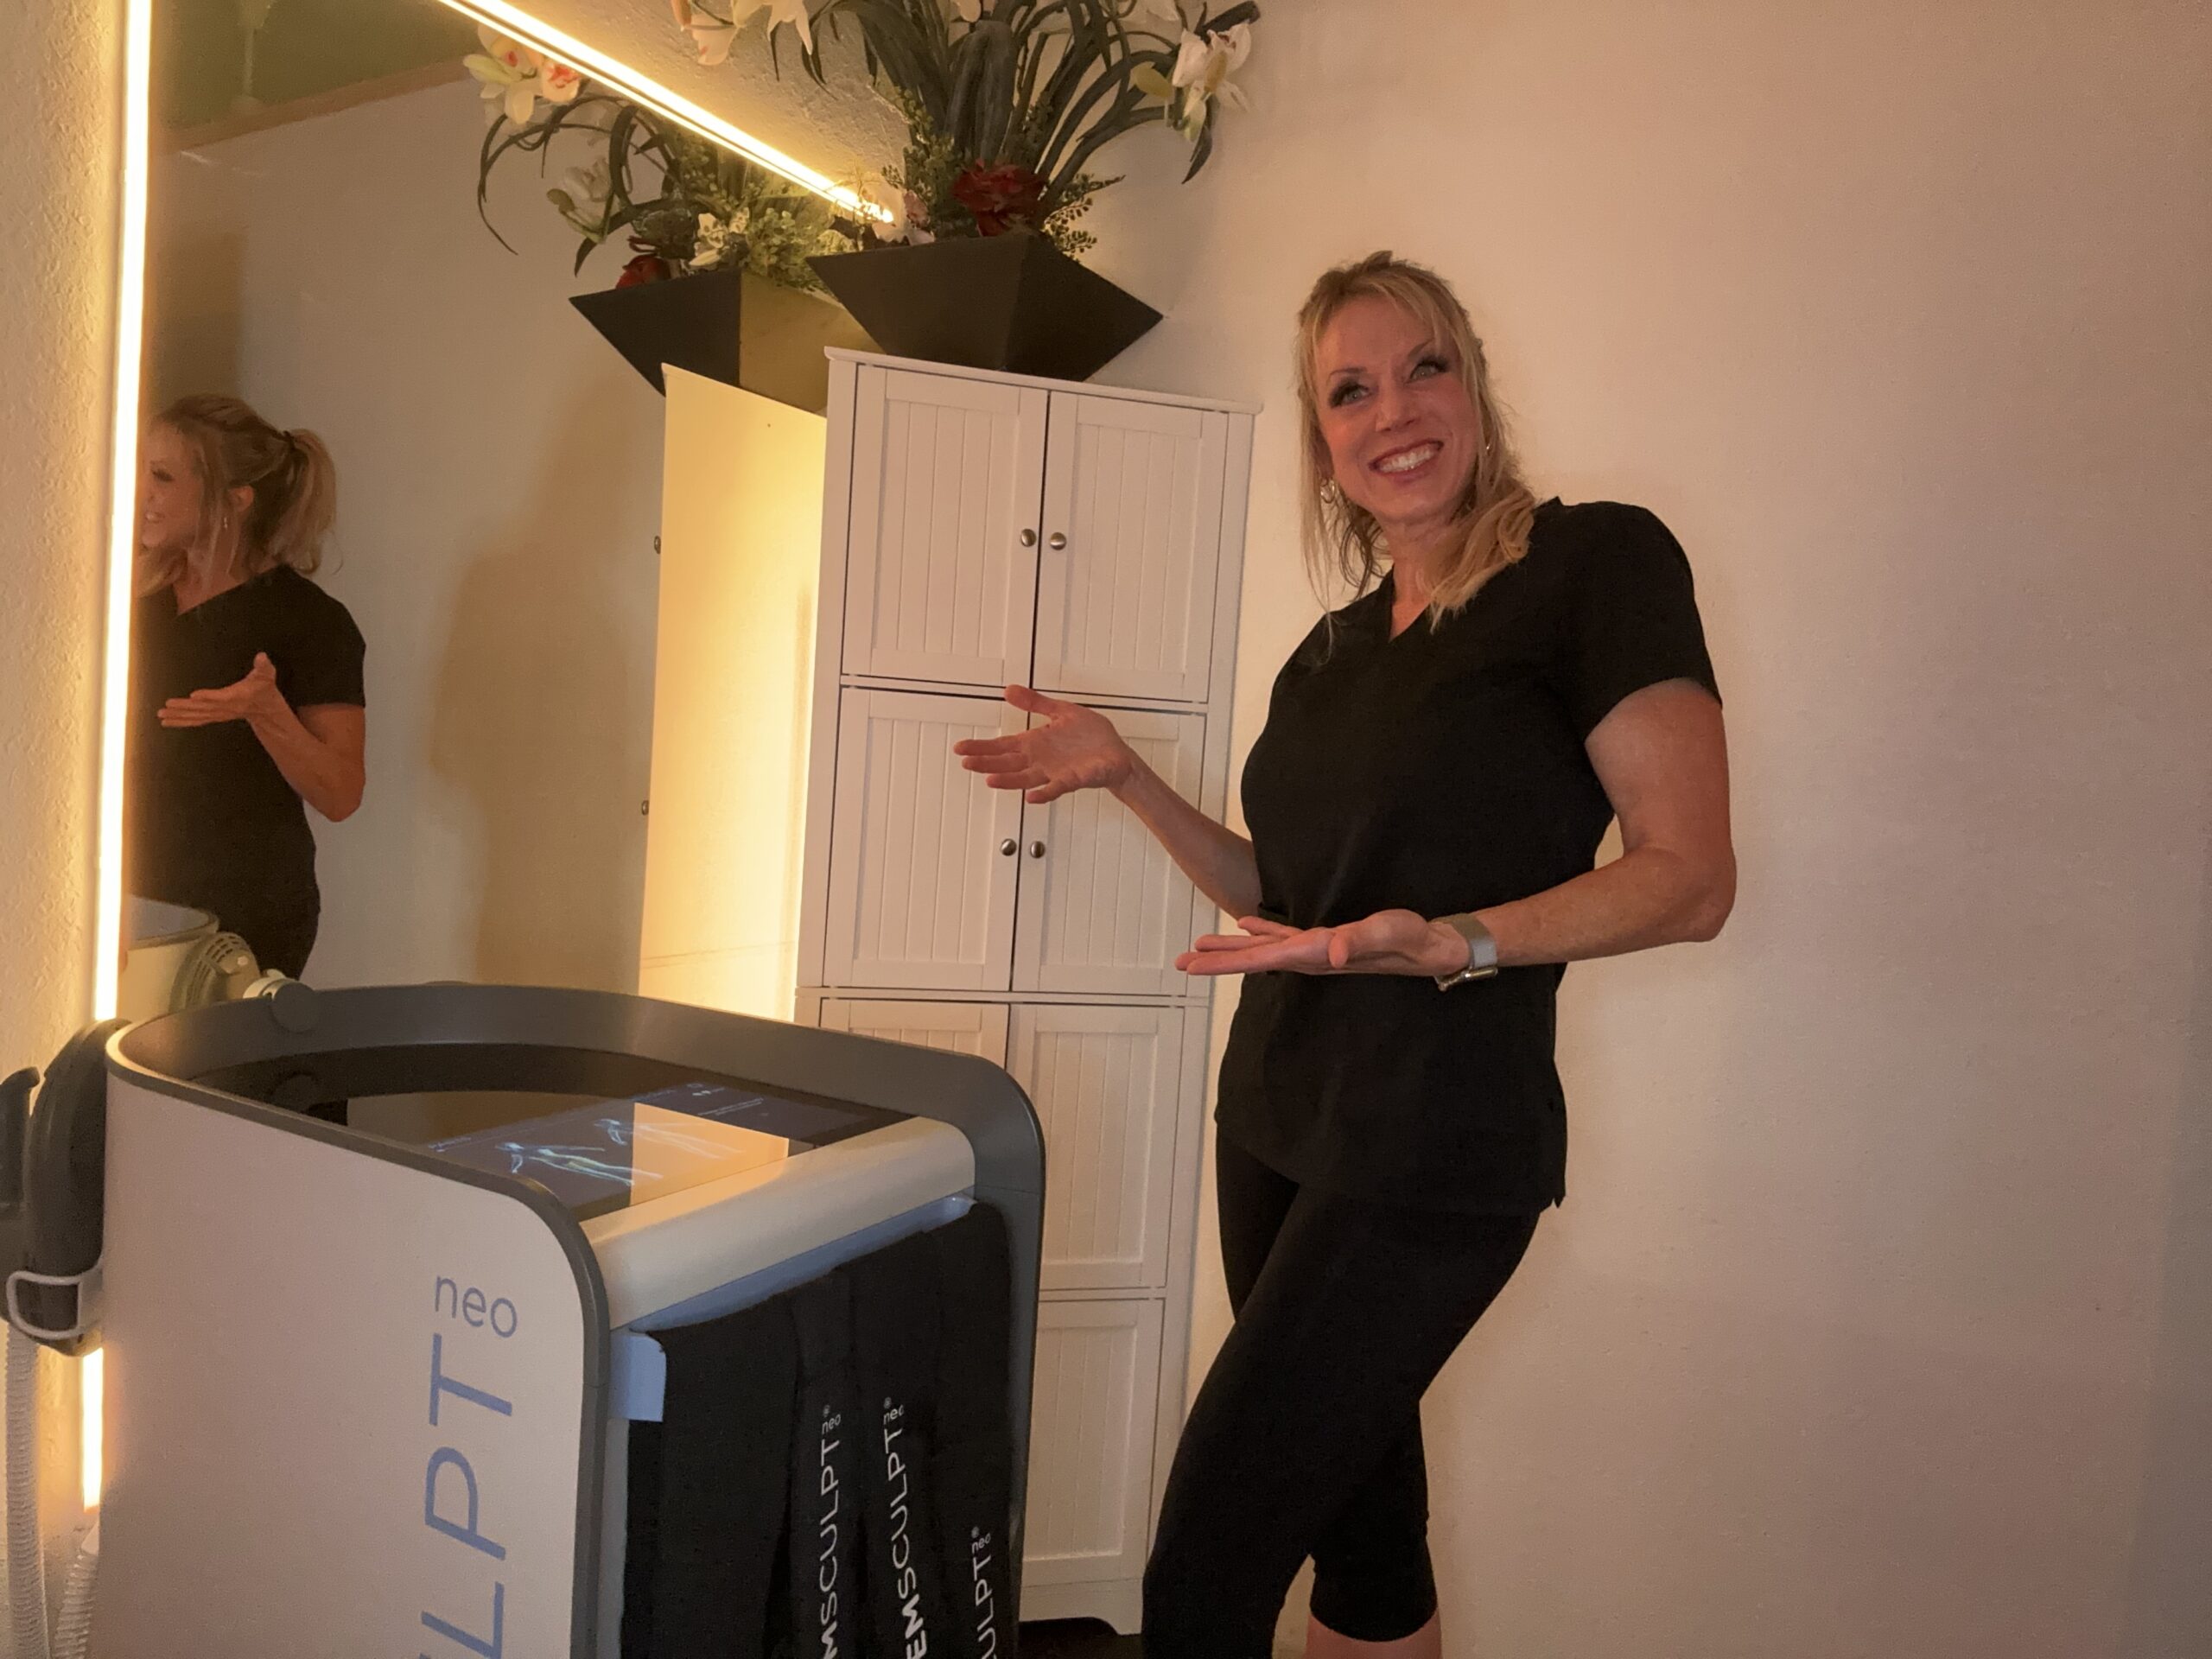 Tahoe Emsculpt at Elevated Fitness